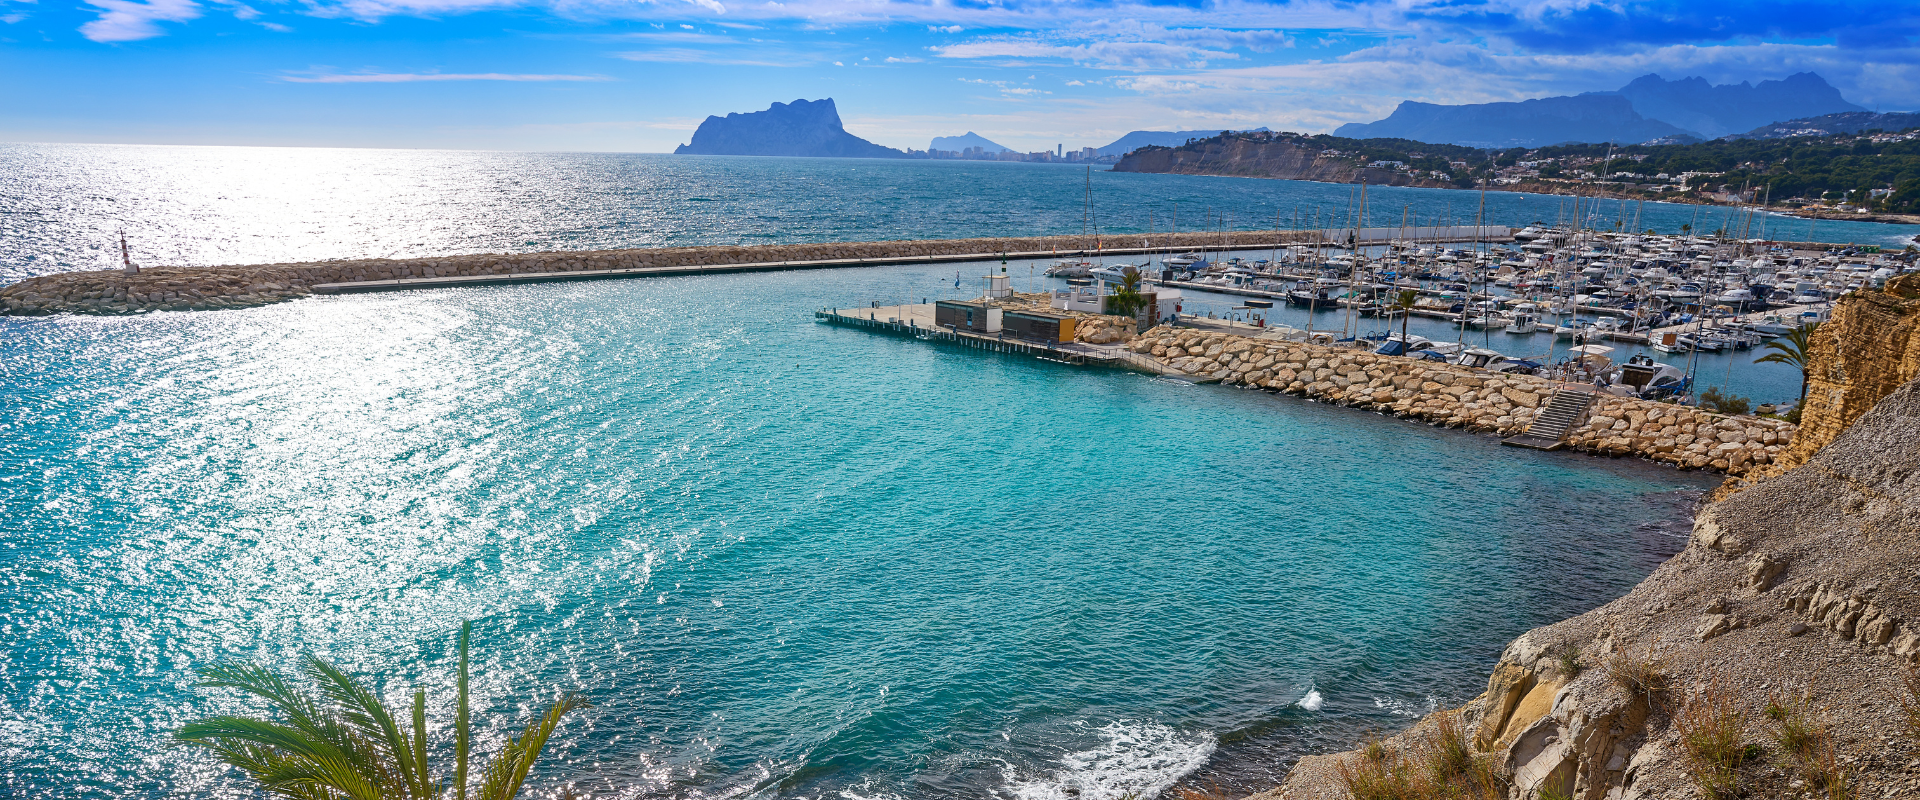 Moraira: Experience Exceptional Weather in a Mediterranean Paradise